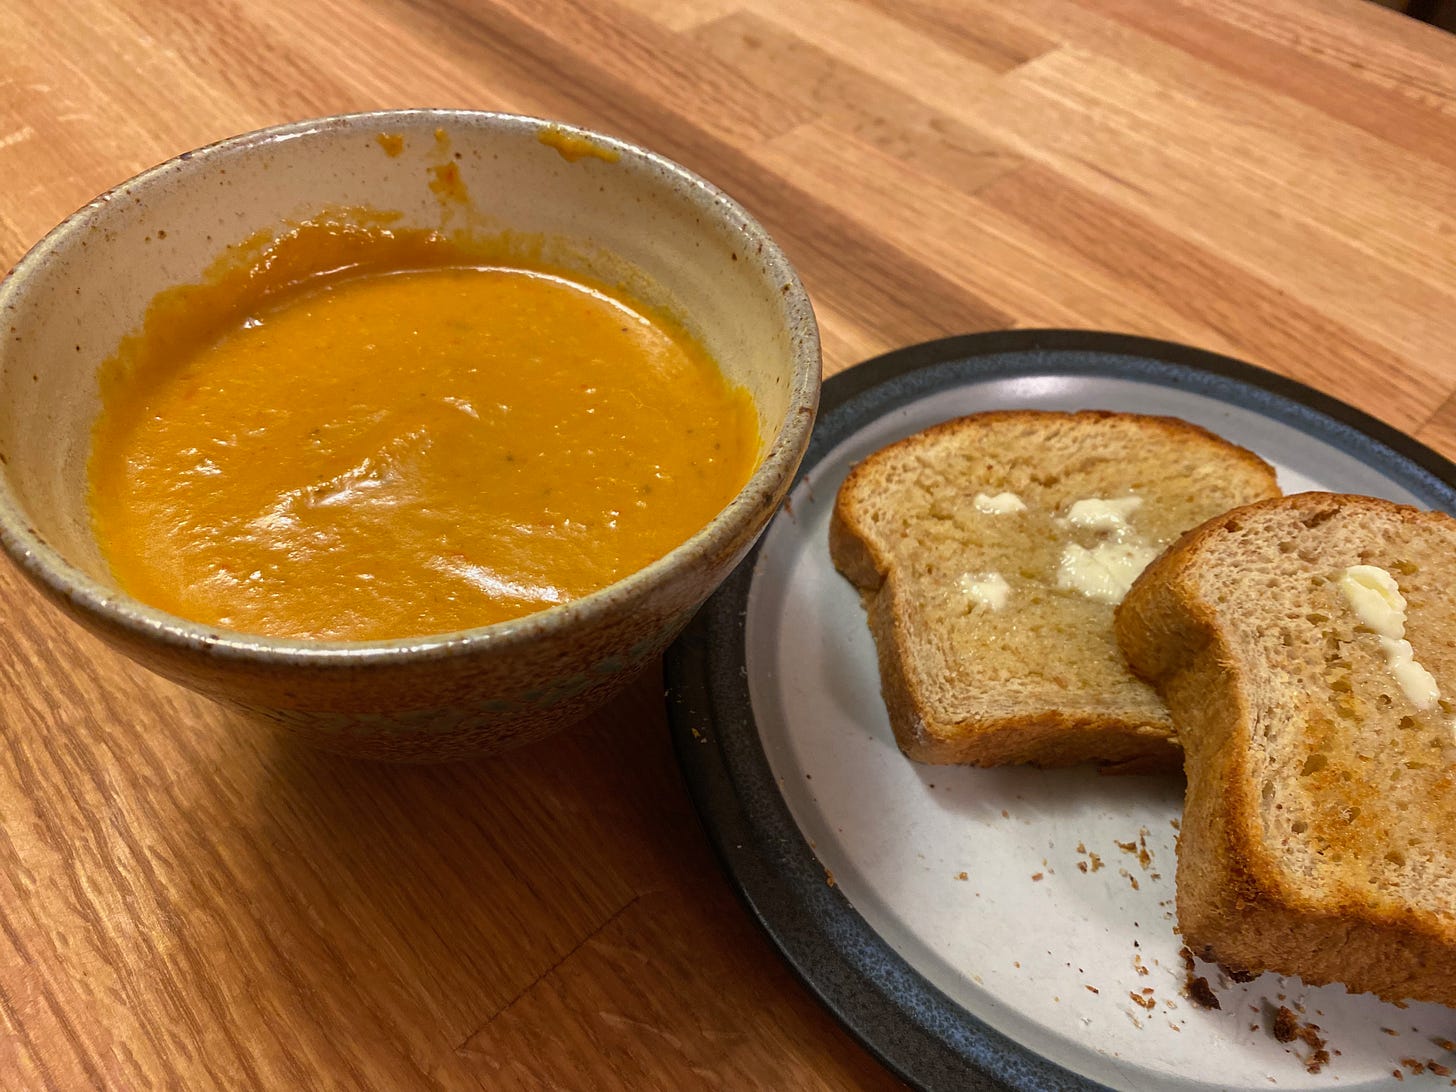 A ceramic bowl of purred orange soup sits on a wooden counter next to a plate holding two slices of buttered toast.